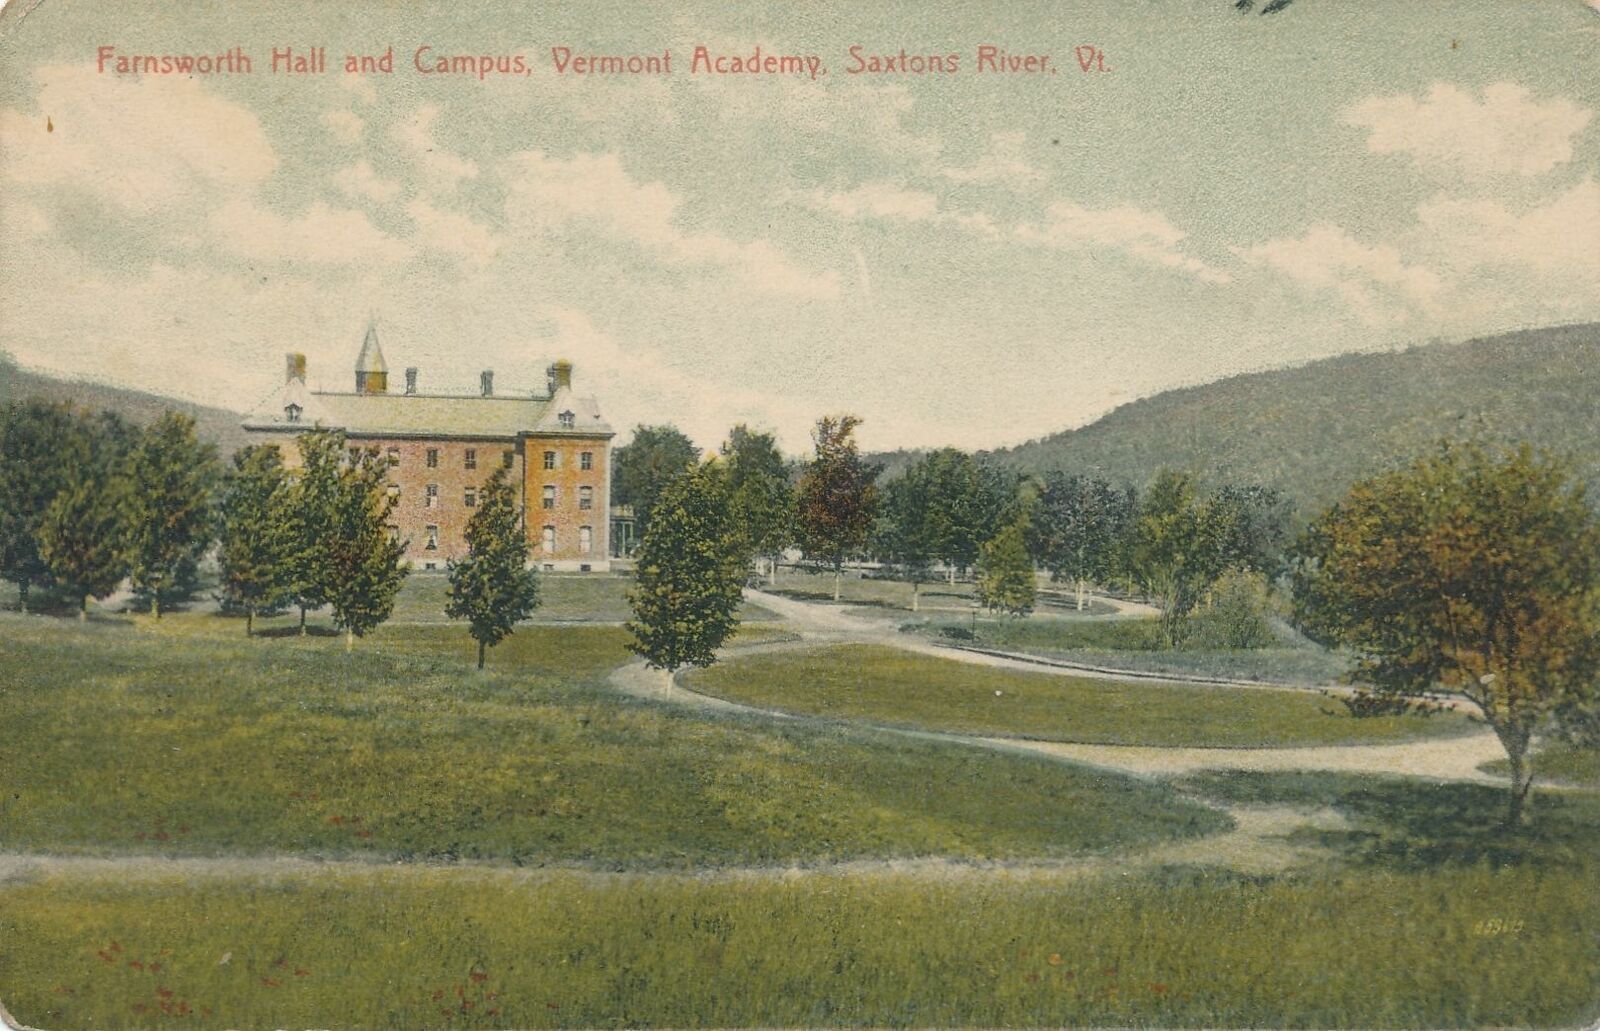 SAXTONS RIVER VT - Vermont Academy Farnsworth Hall and Campus